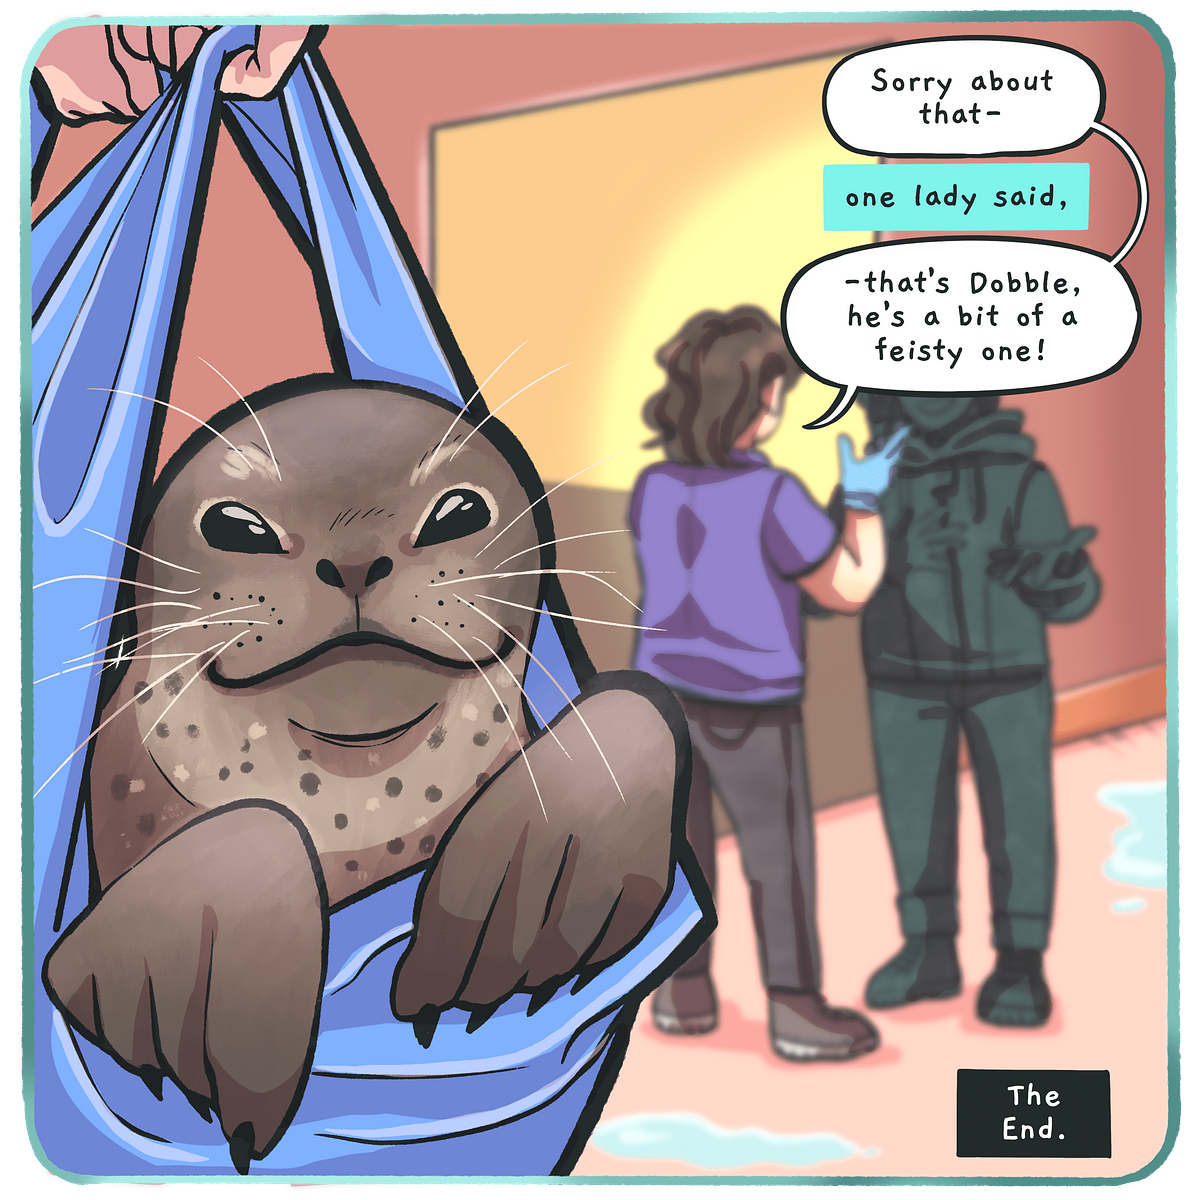 comic illustration on frustrated seal swaddled in blankets with text bubbles that read 'Sorry about that' 'One lady said, - that's Dobble, he's a bit of a feisty one!' 'The End.'